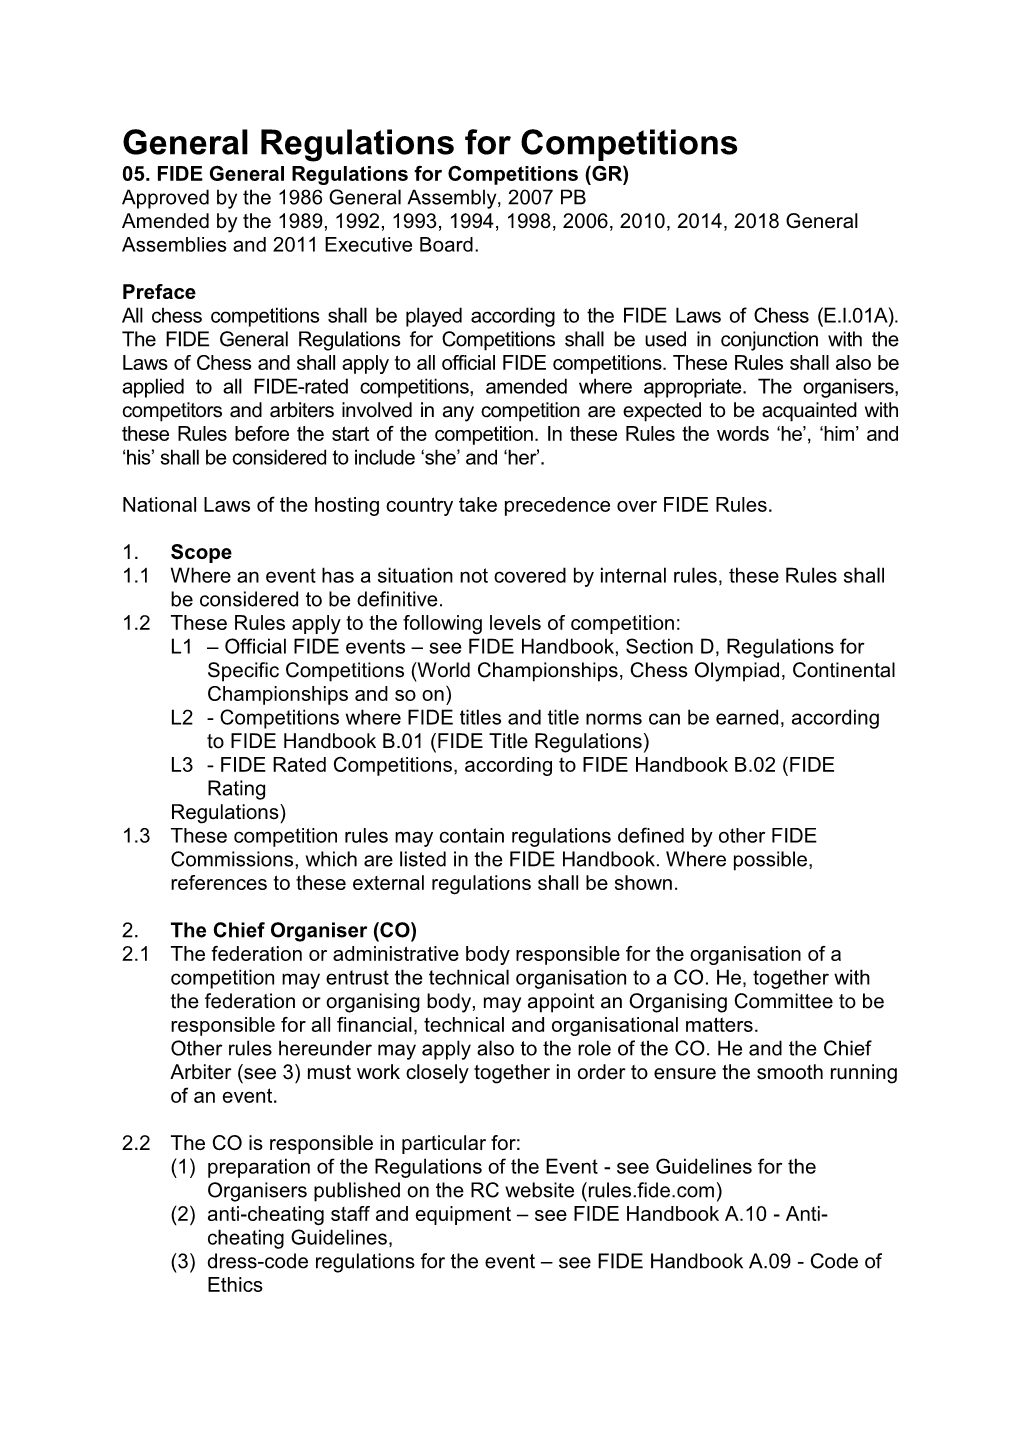 General Regulations for Competitions 05